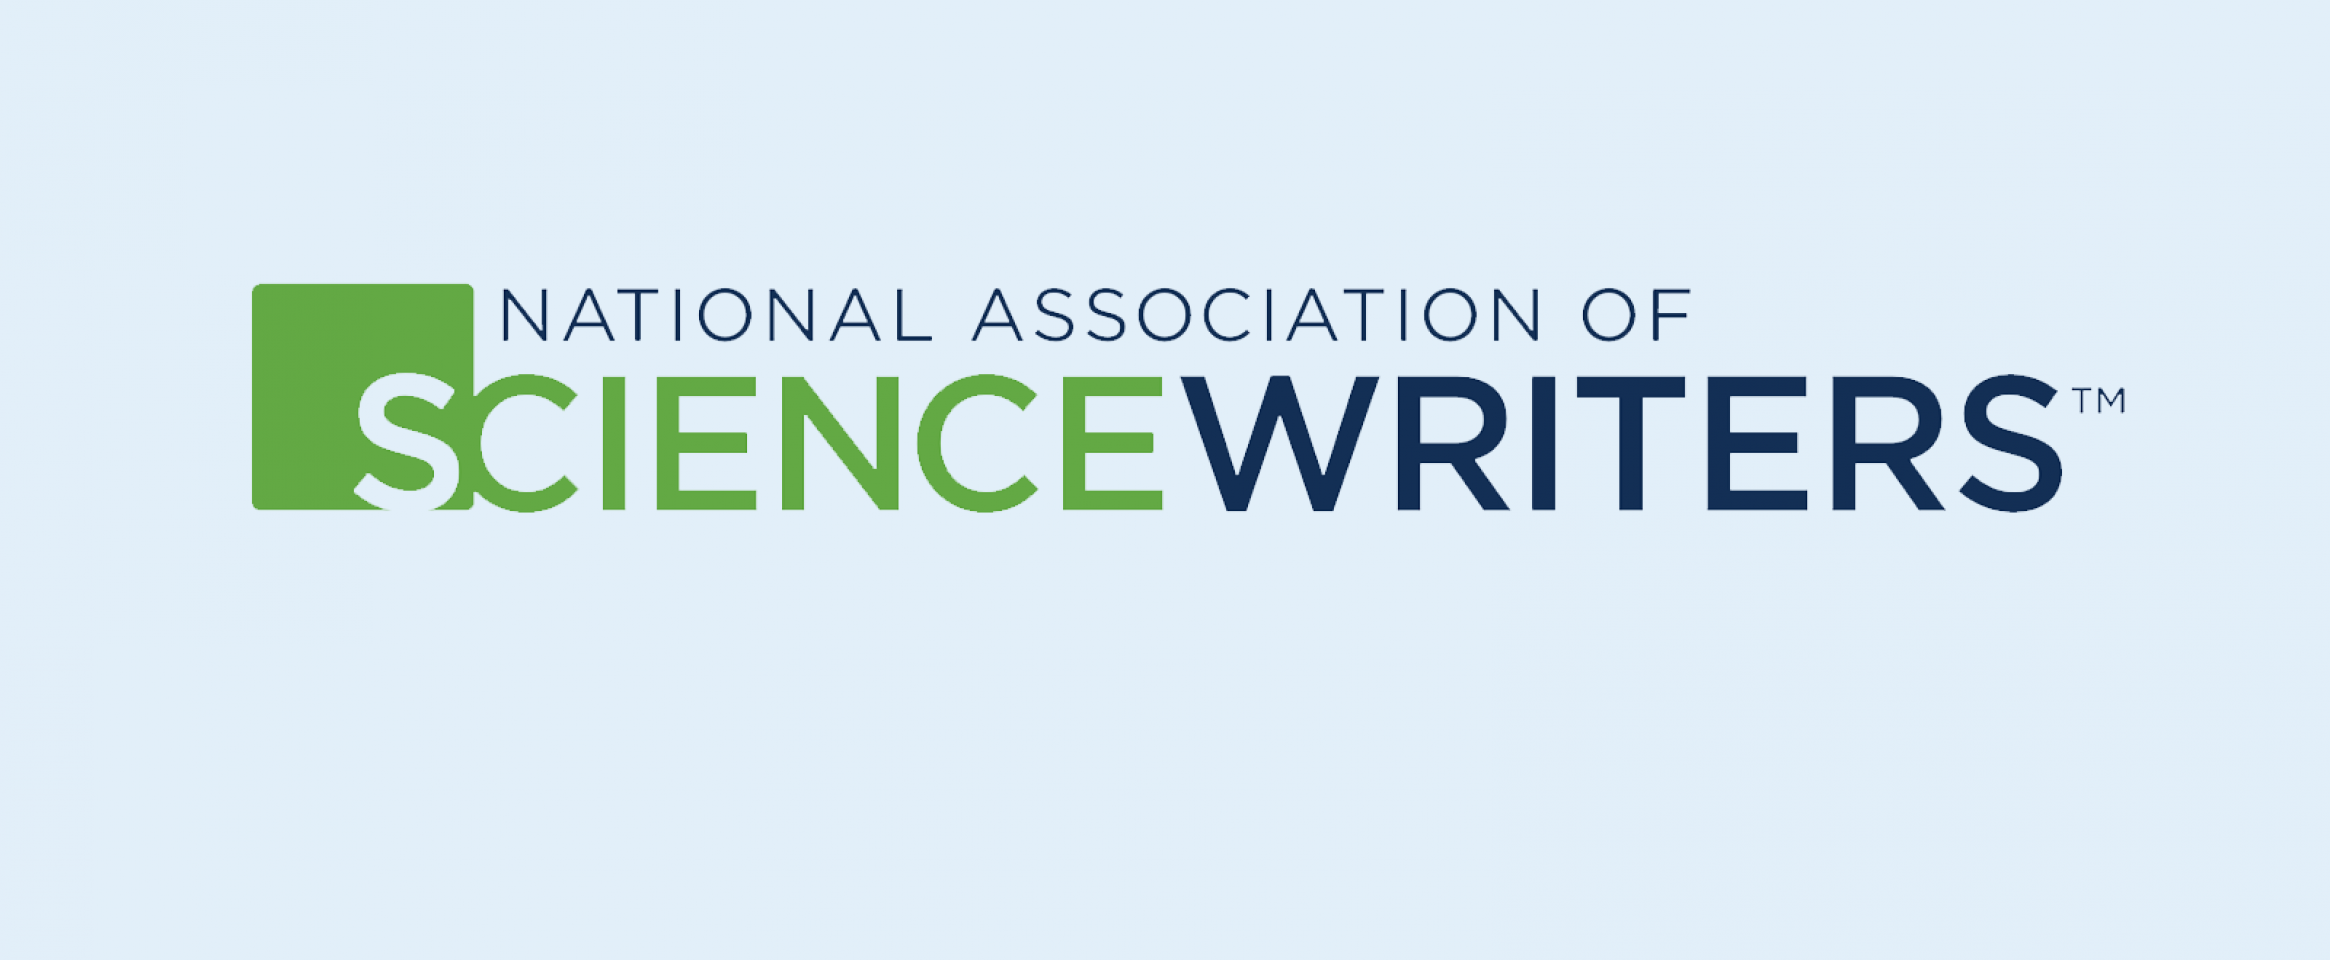 Logomark of the National Association of Science Writers